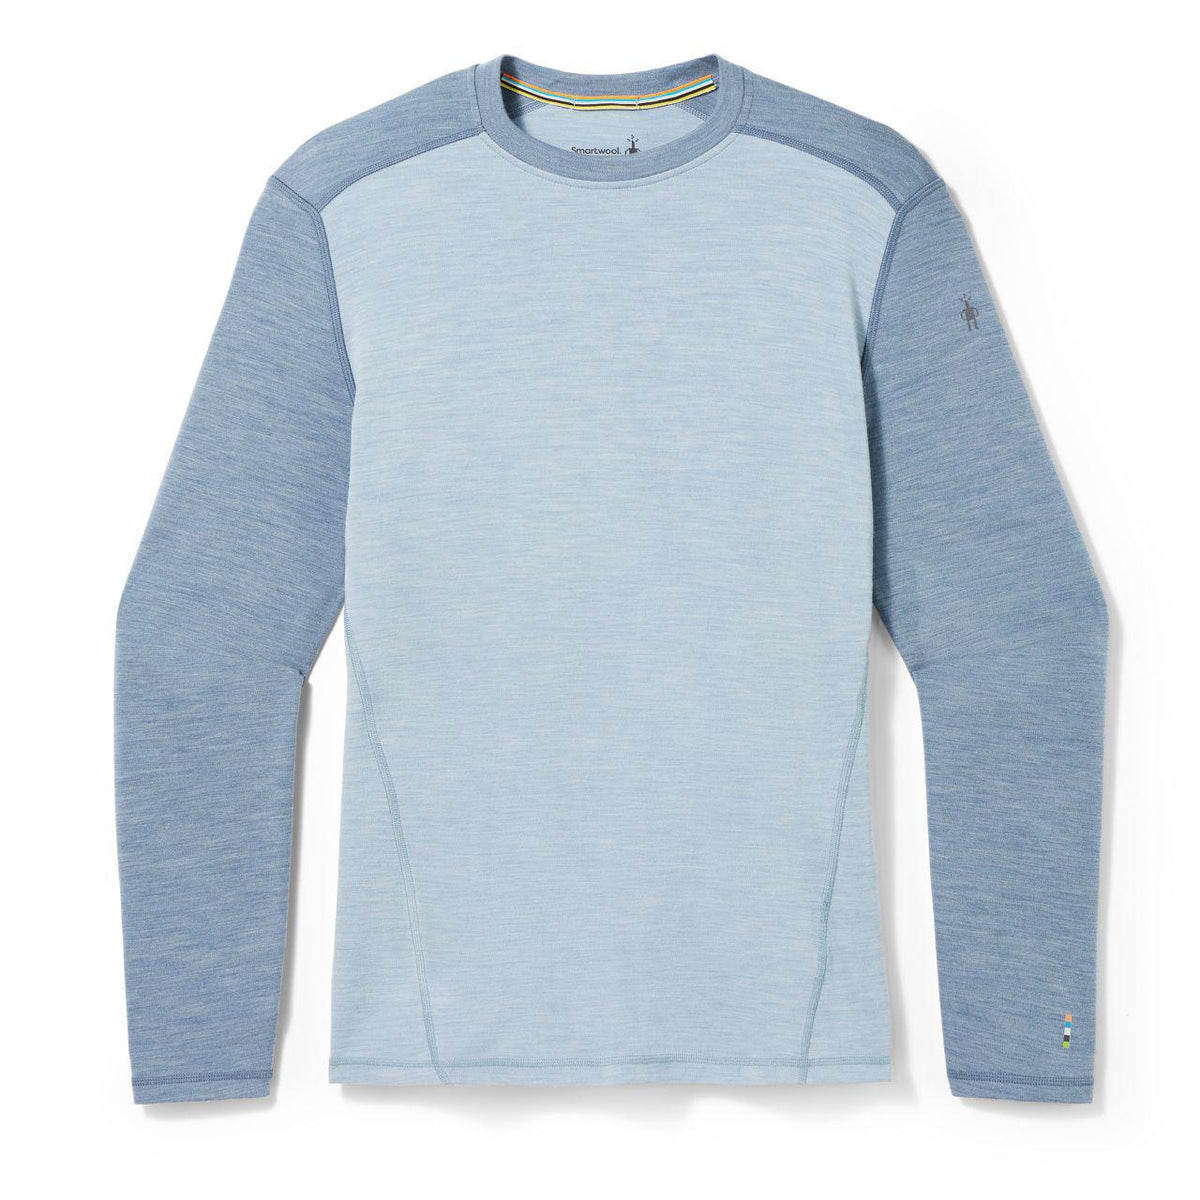 Smartwool-Men's Smartwool Classic Thermal Merino Base Layer Crew-Pewter Blue-Lead-Pacers Running